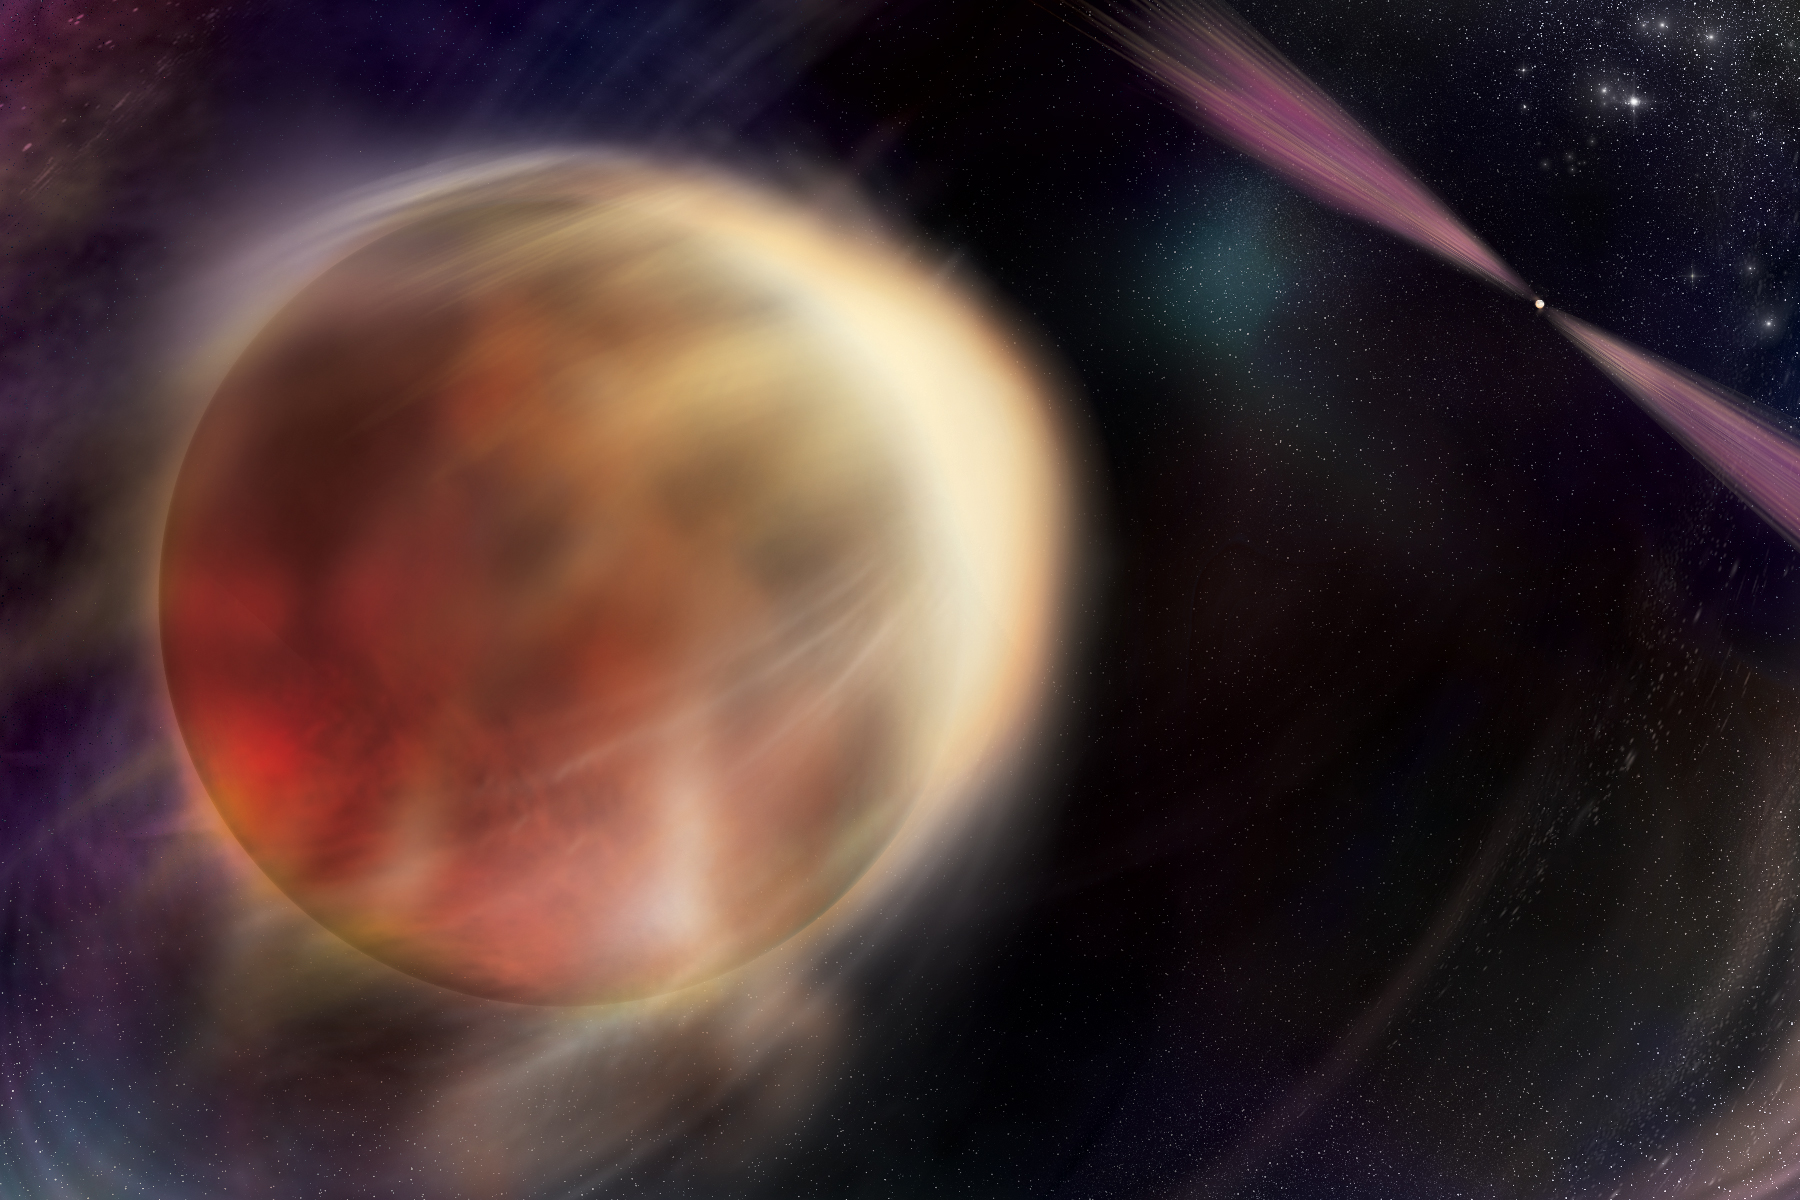 An orbiting star begins to eclipse its partner, a rapidly rotating, superdense stellar remnant called a pulsar, in this illustration. The pulsar emits multiwavelength beams of light that rotate in and out of view and produces outflows that heat the star’s facing side, blowing away material and eroding its partner.Credit: NASA/Sonoma State University, Aurore Simonnet